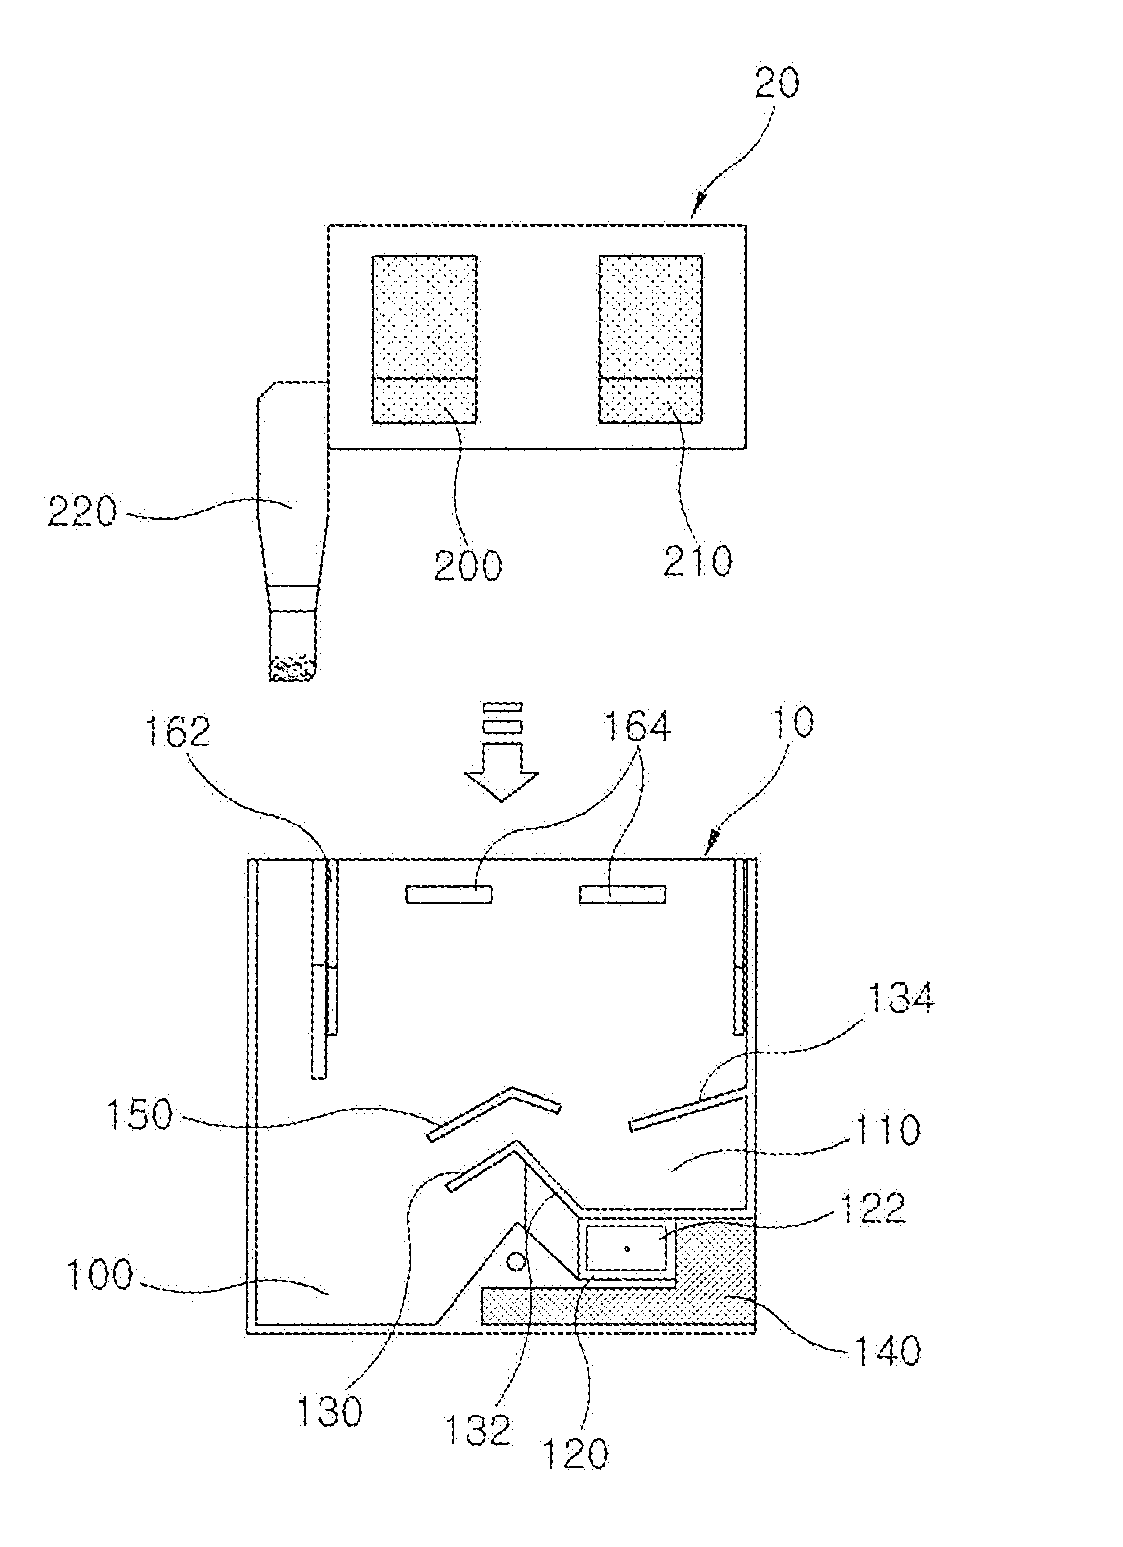 Reaction cassette for measuring the concentration of glycated hemoglobin and measuring method thereof